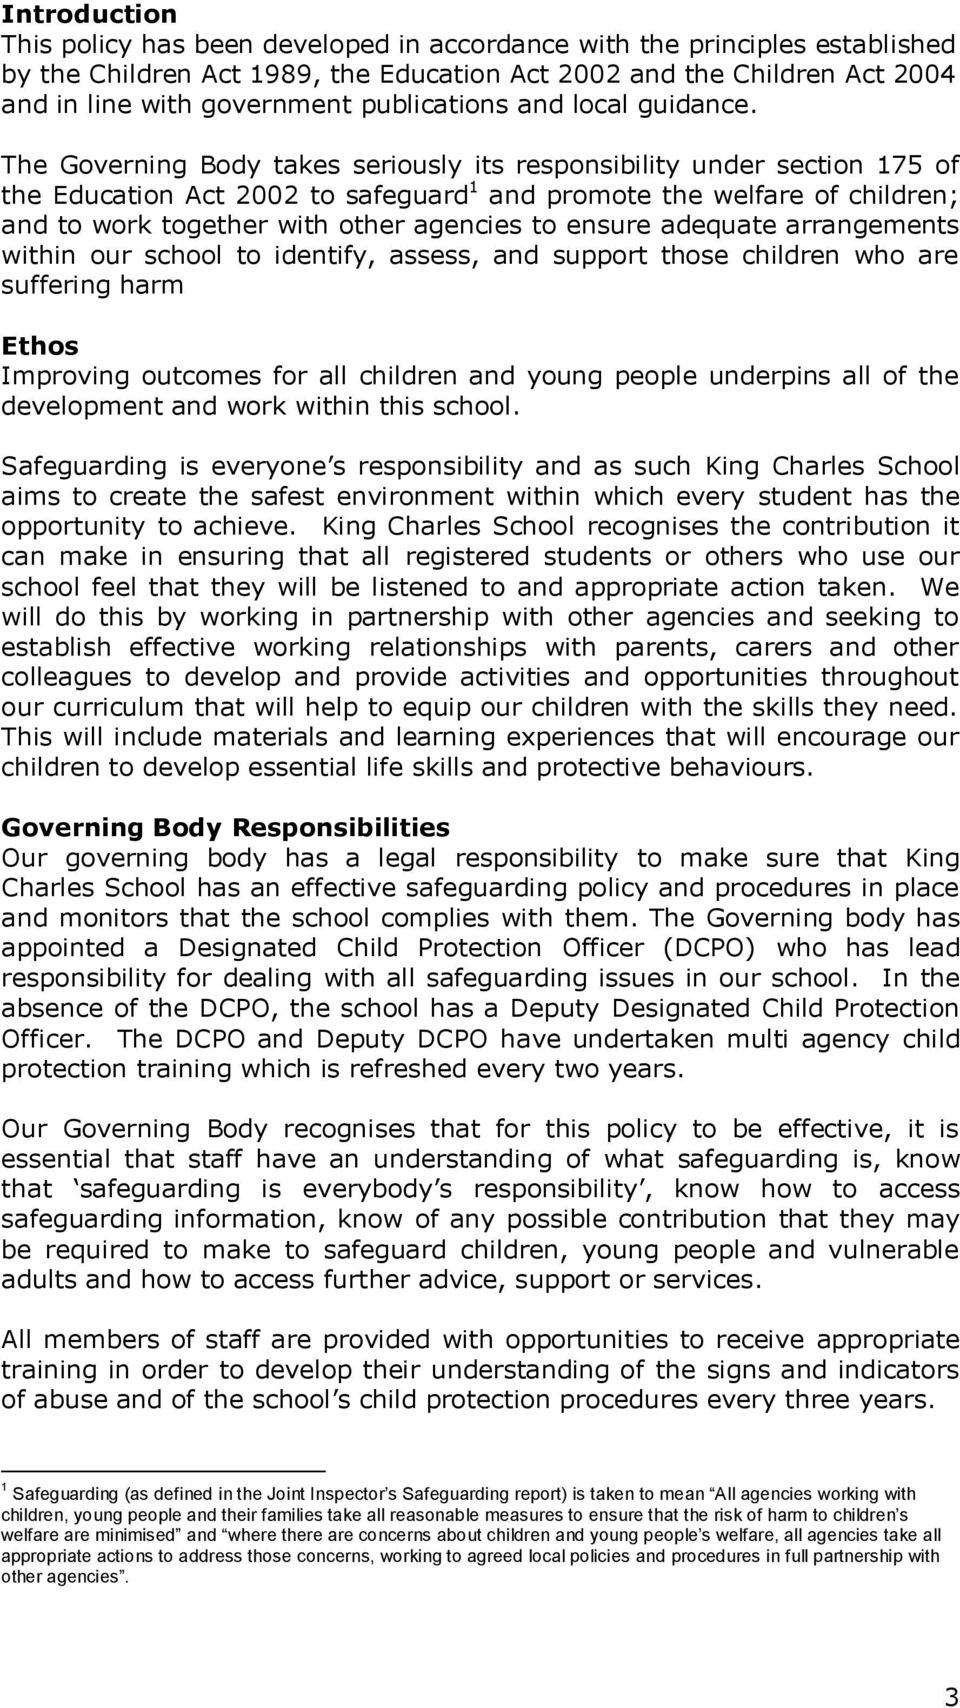 The Governing Body takes seriously its responsibility under section 175 of the Education Act 2002 to safeguard 1 and promote the welfare of children; and to work together with other agencies to